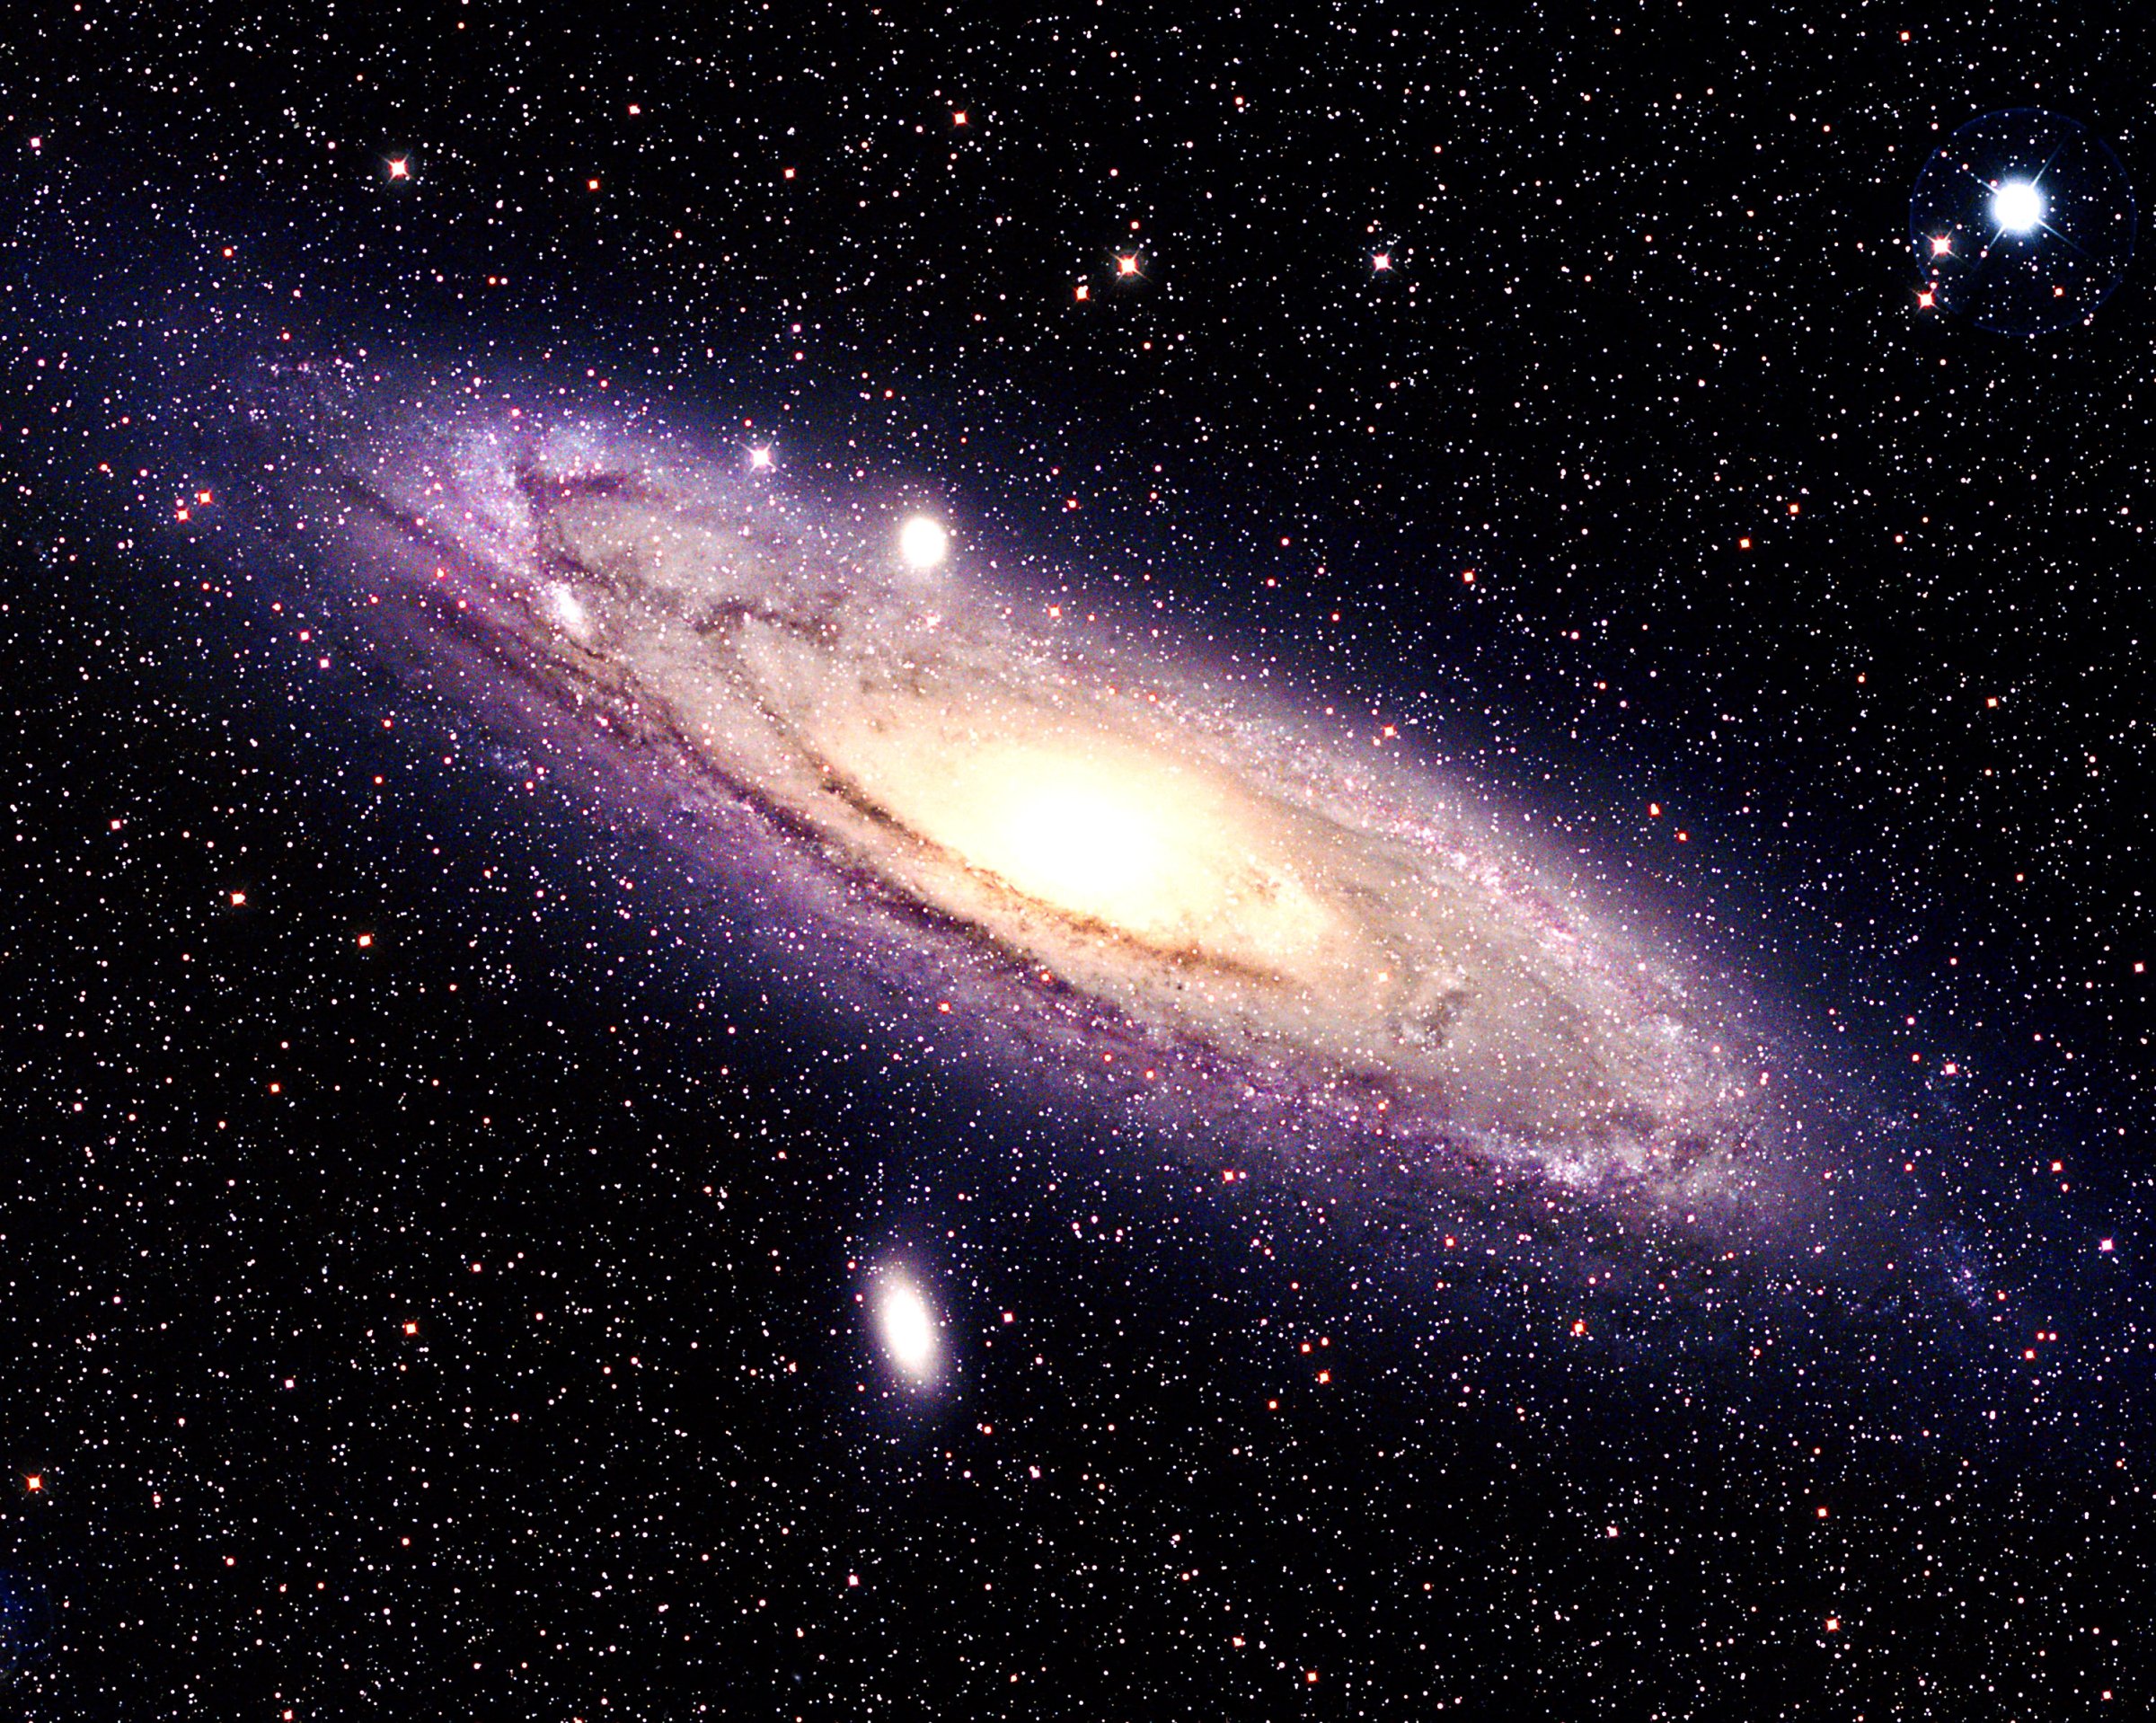 Coming soon (sort of): The Andromeda Galaxy (above) will produce lots of free-range stars when it merges with the Milky Way—in two billion years.